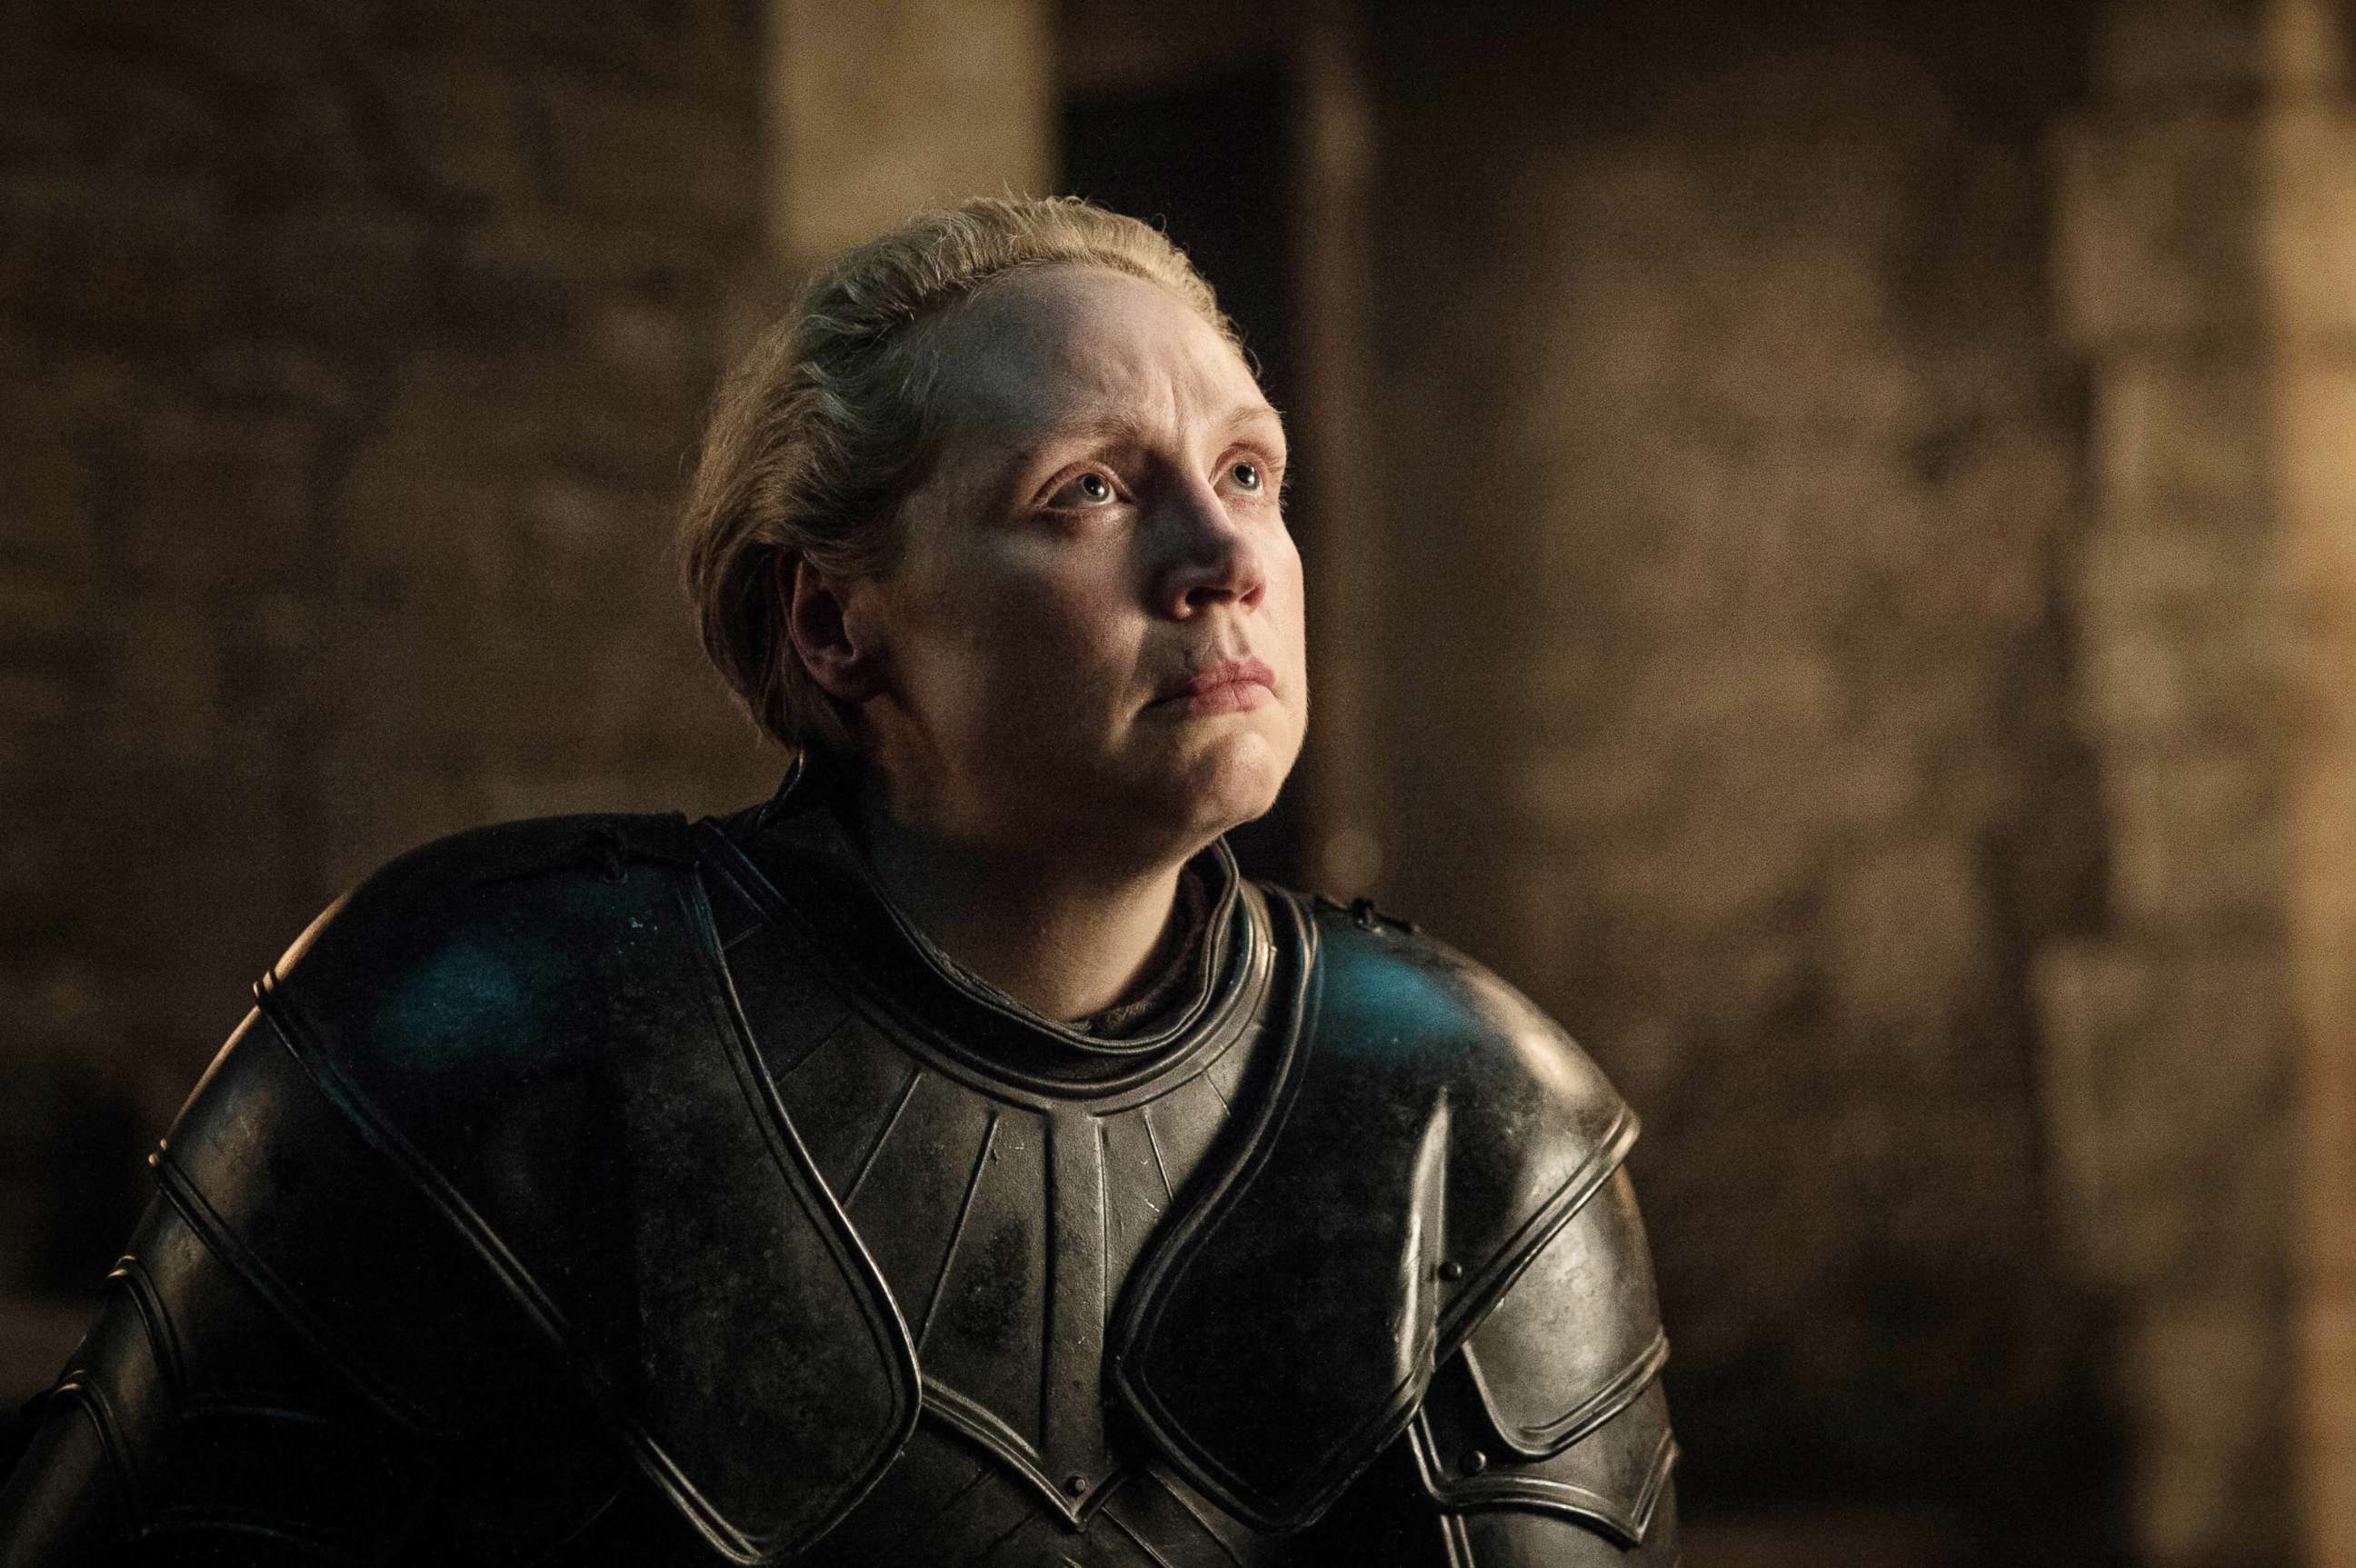 PHOTO: Gwendoline Christie in a scene from "Game of Thrones."